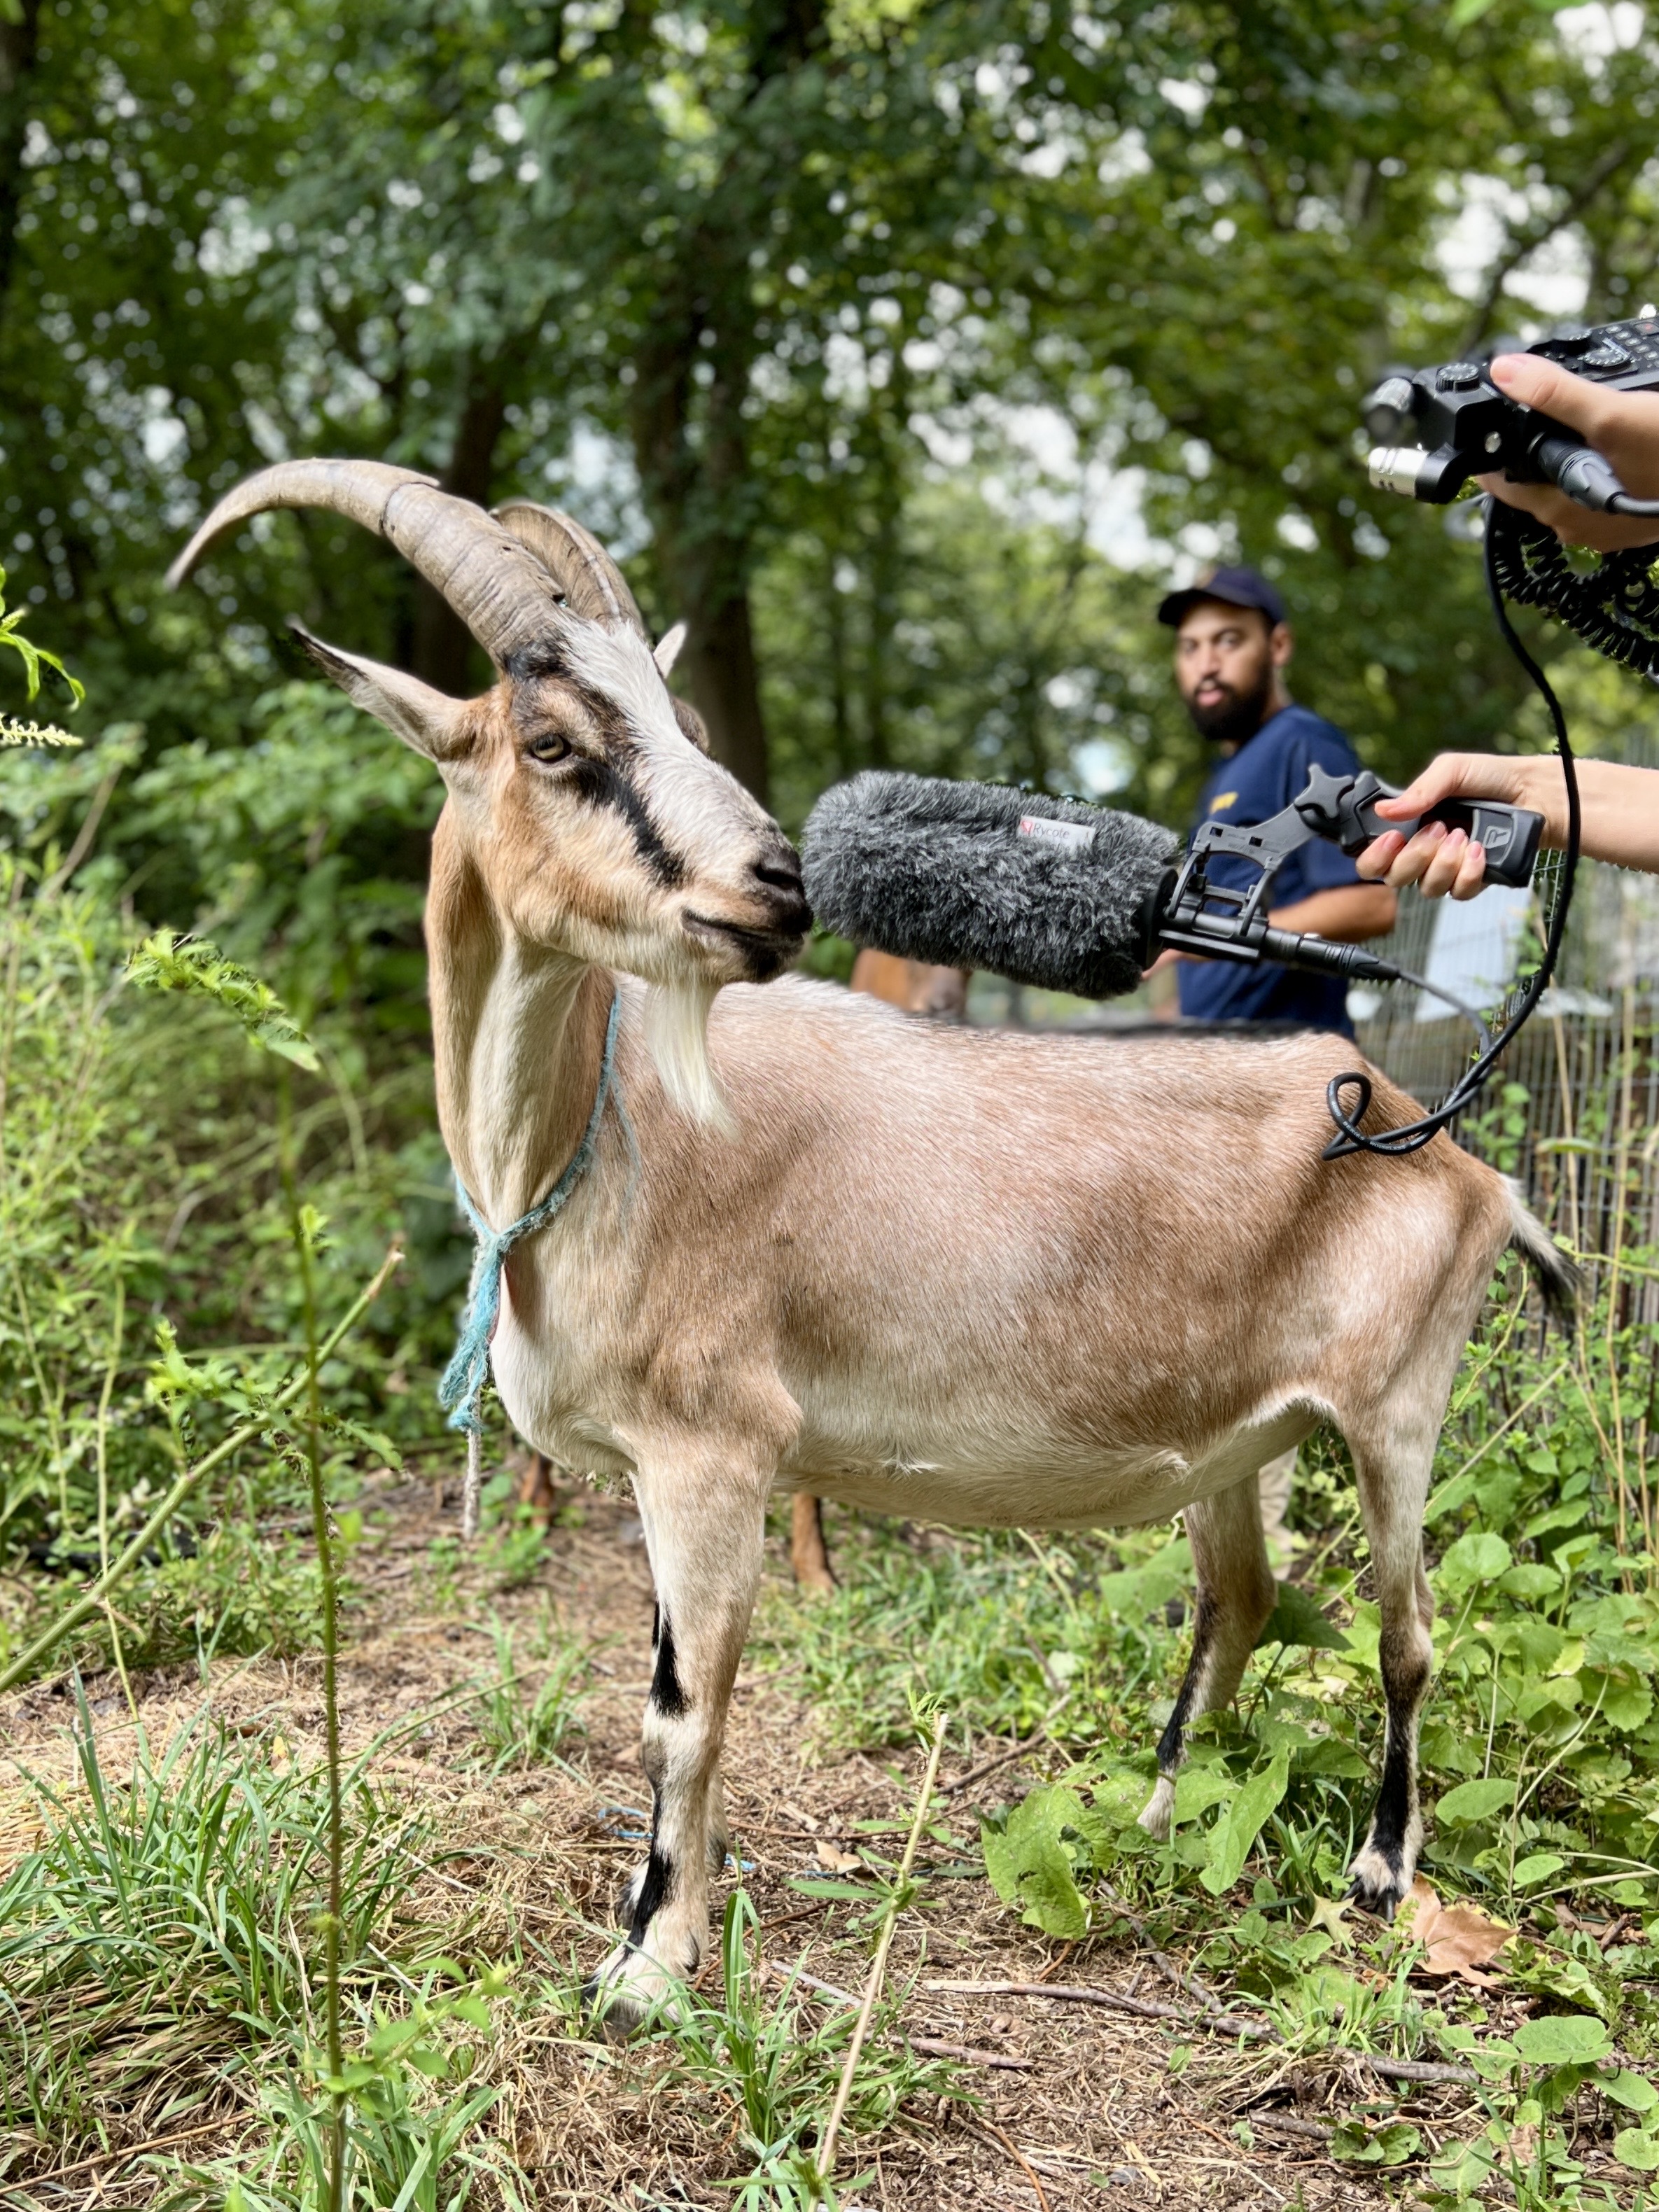 The New G.O.A.T. Of Park Systems Is An Actual Goat